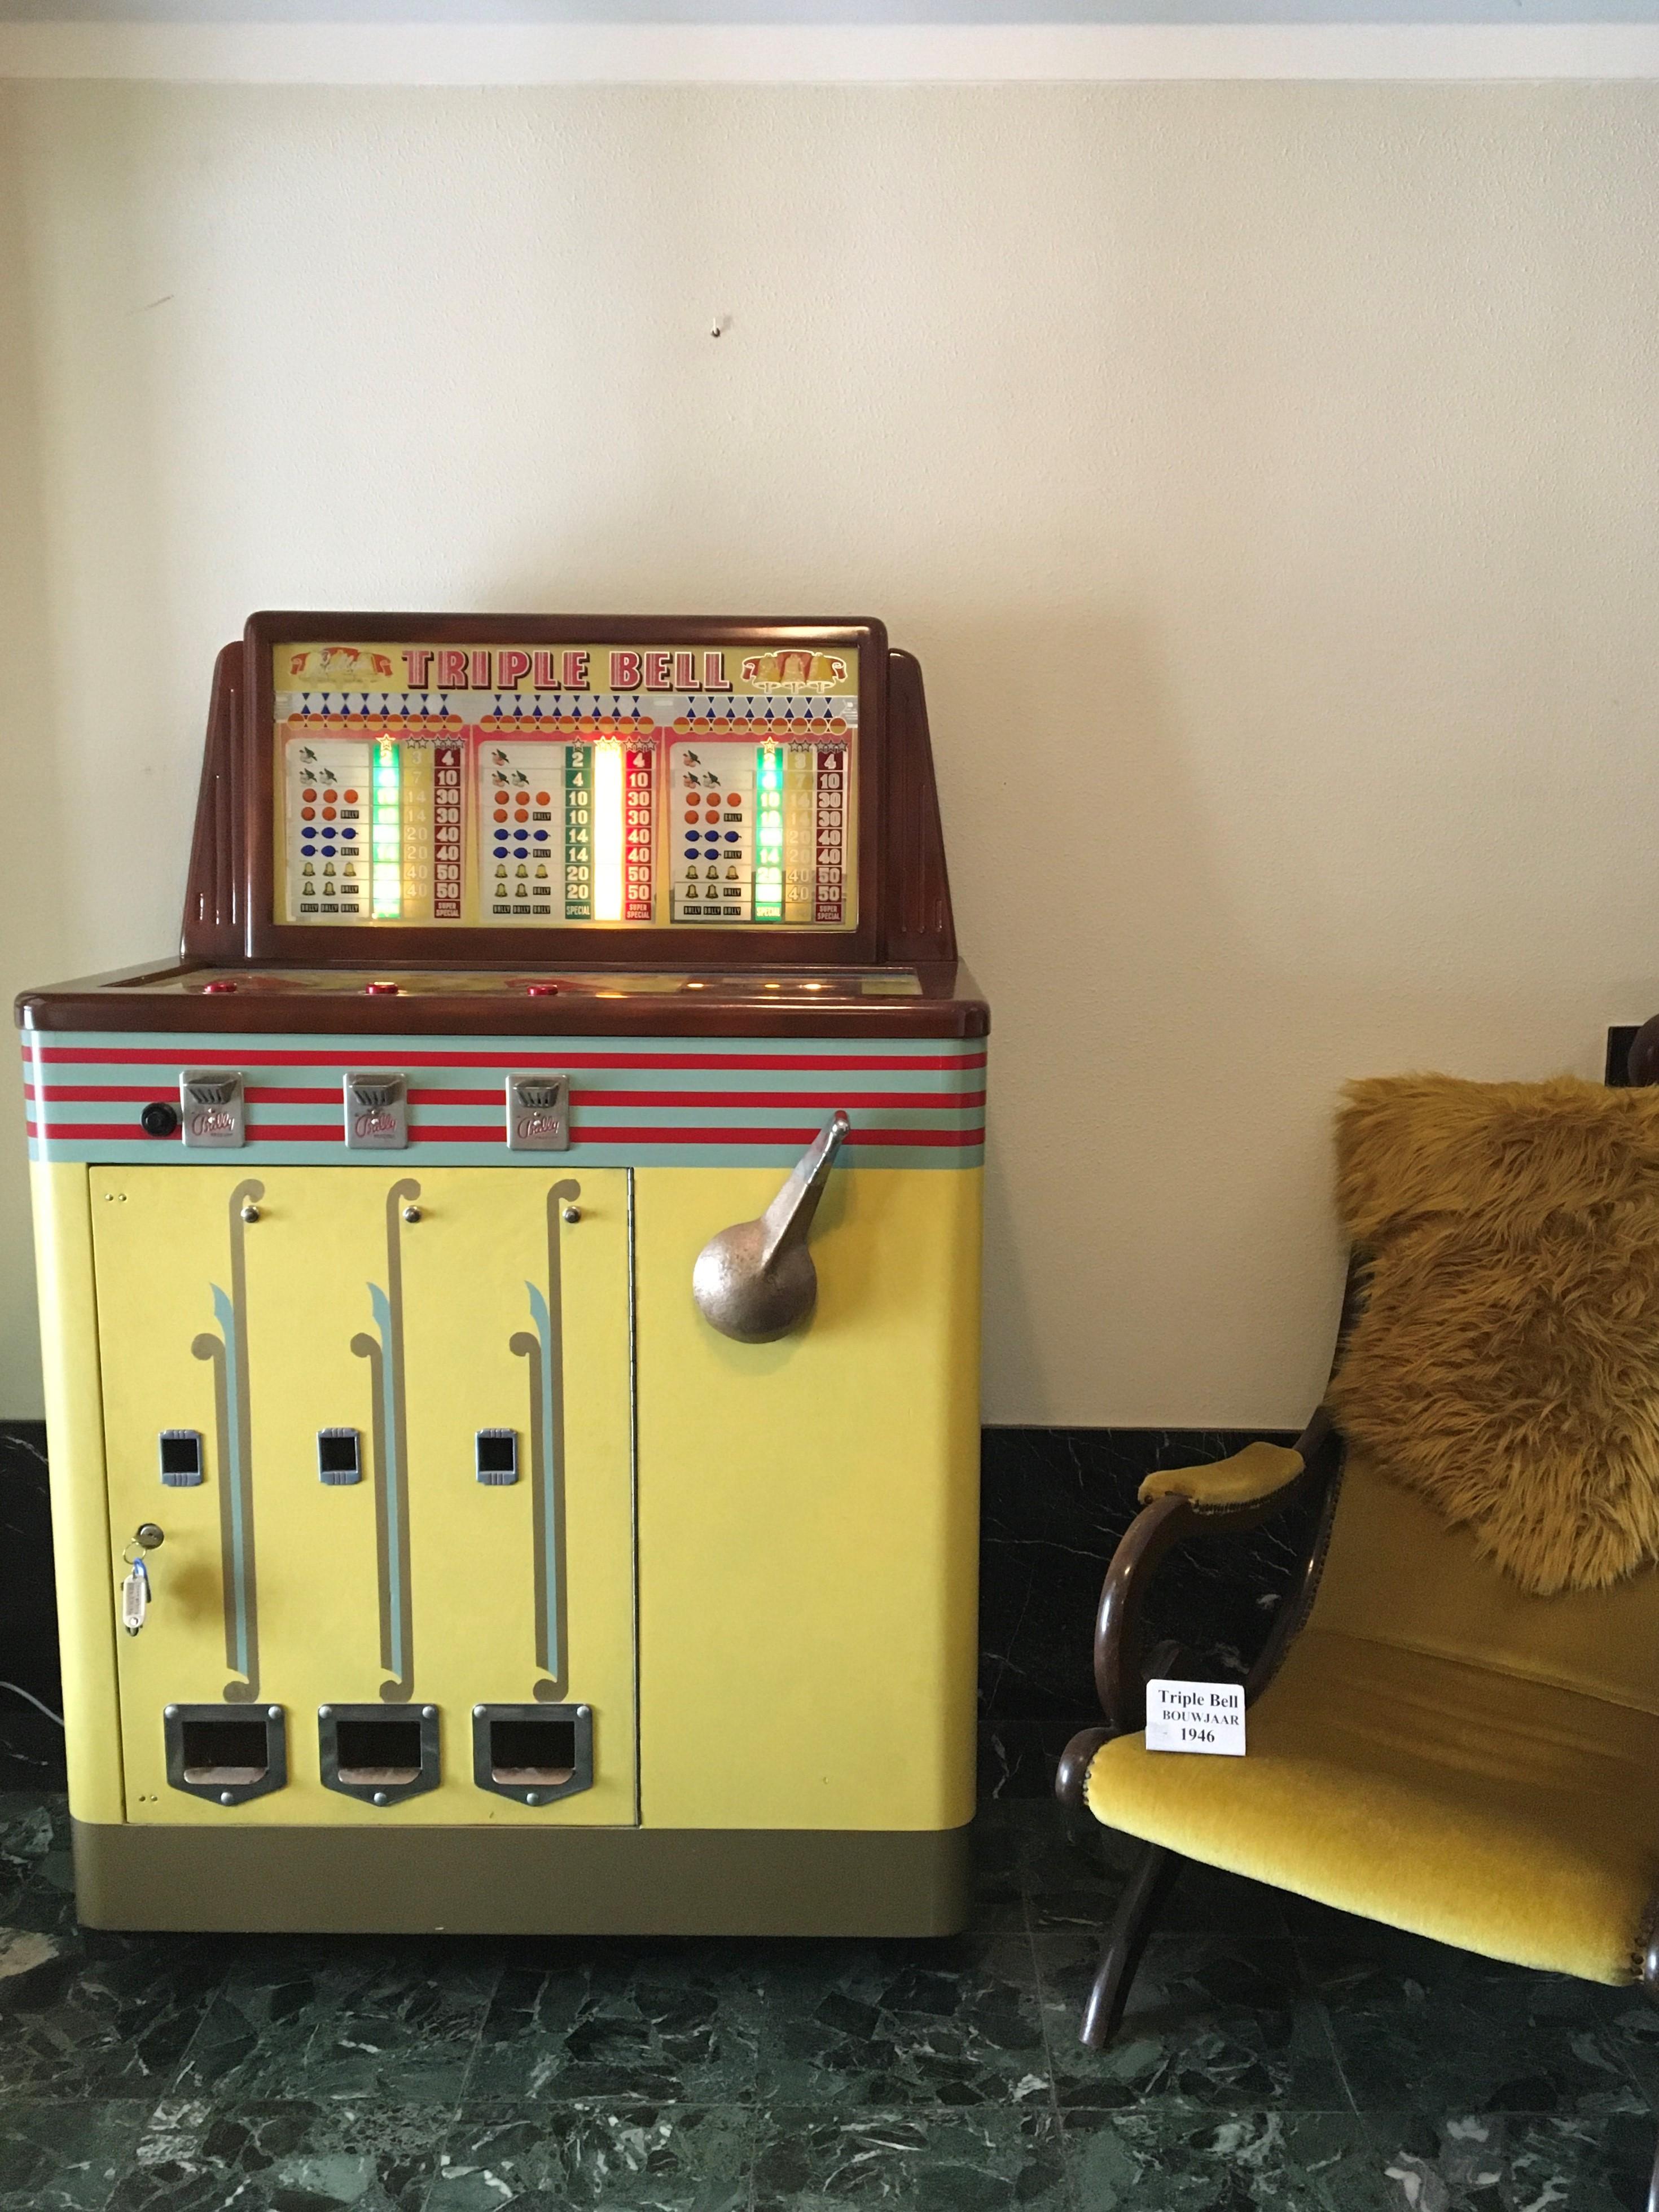 1946 Bally Manufacturing Co. - Triple bell - Console slot machine - one-armed Bandit.

This Art Deco vending machine that we sell was restorated as well on the inside as outside. 
The outside looks great by his design and colors and with the